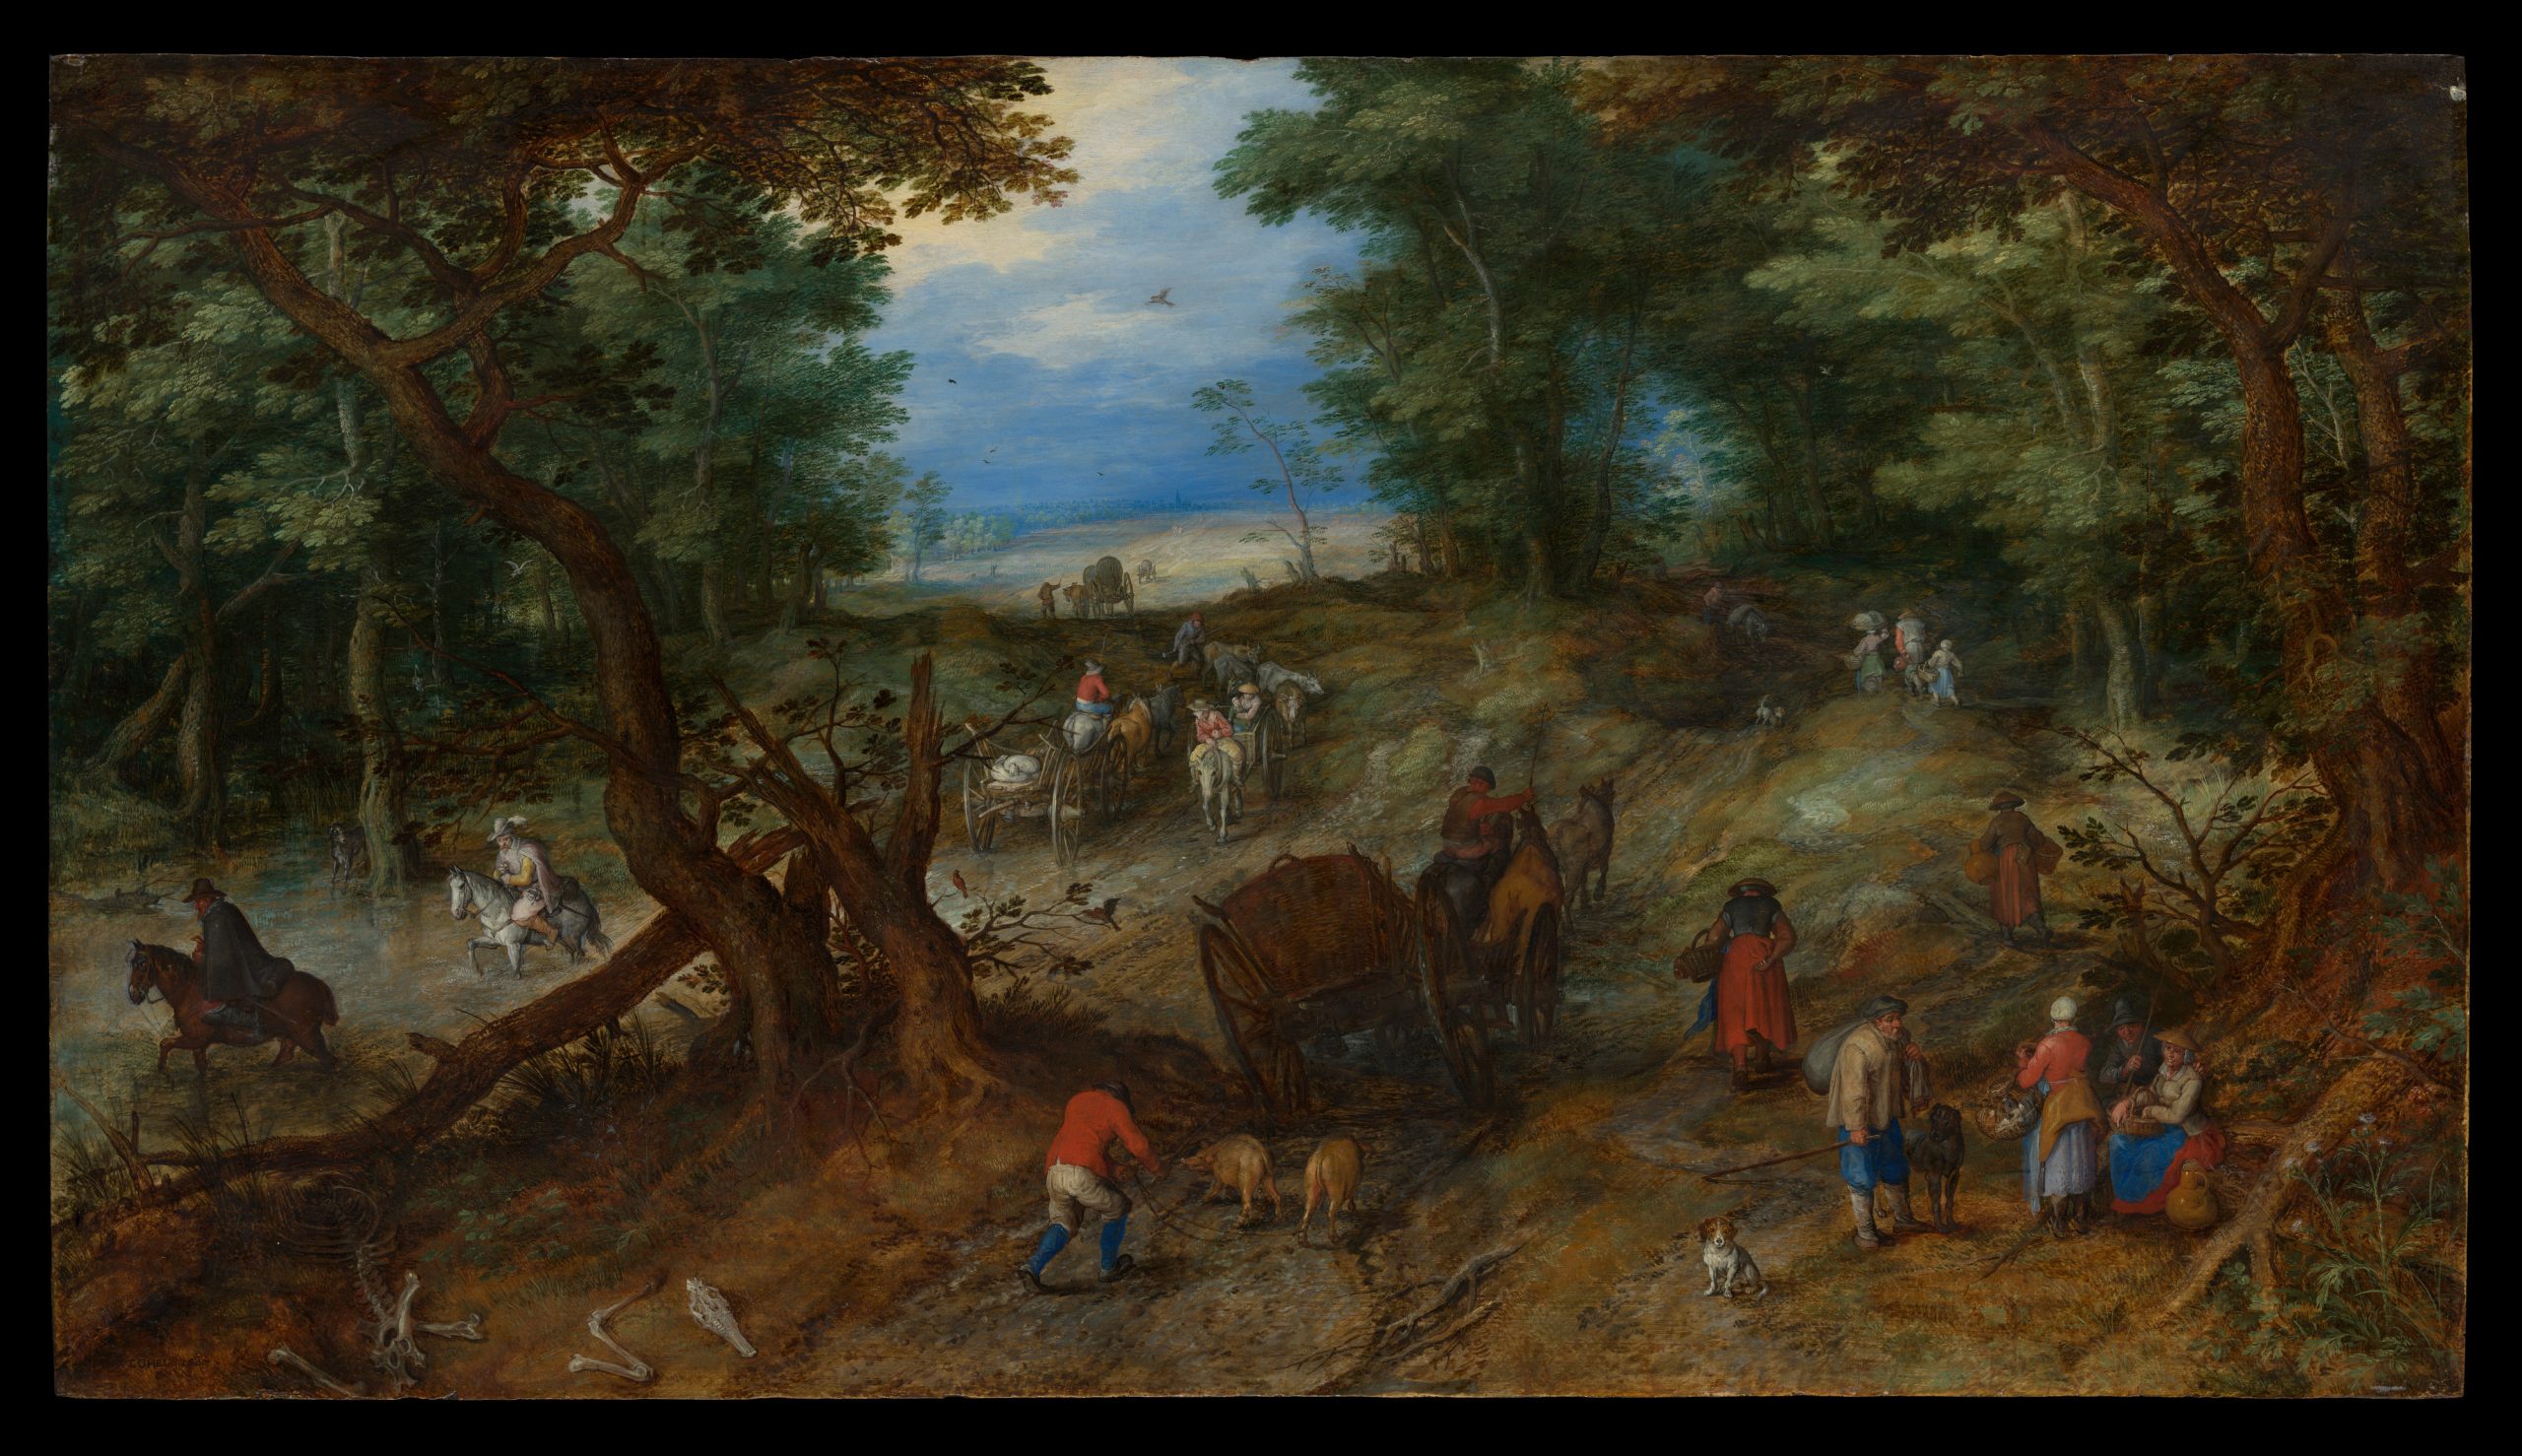 A landscape view of a woodland forest with peasants engaging in variety of everyday tasks in the foreground